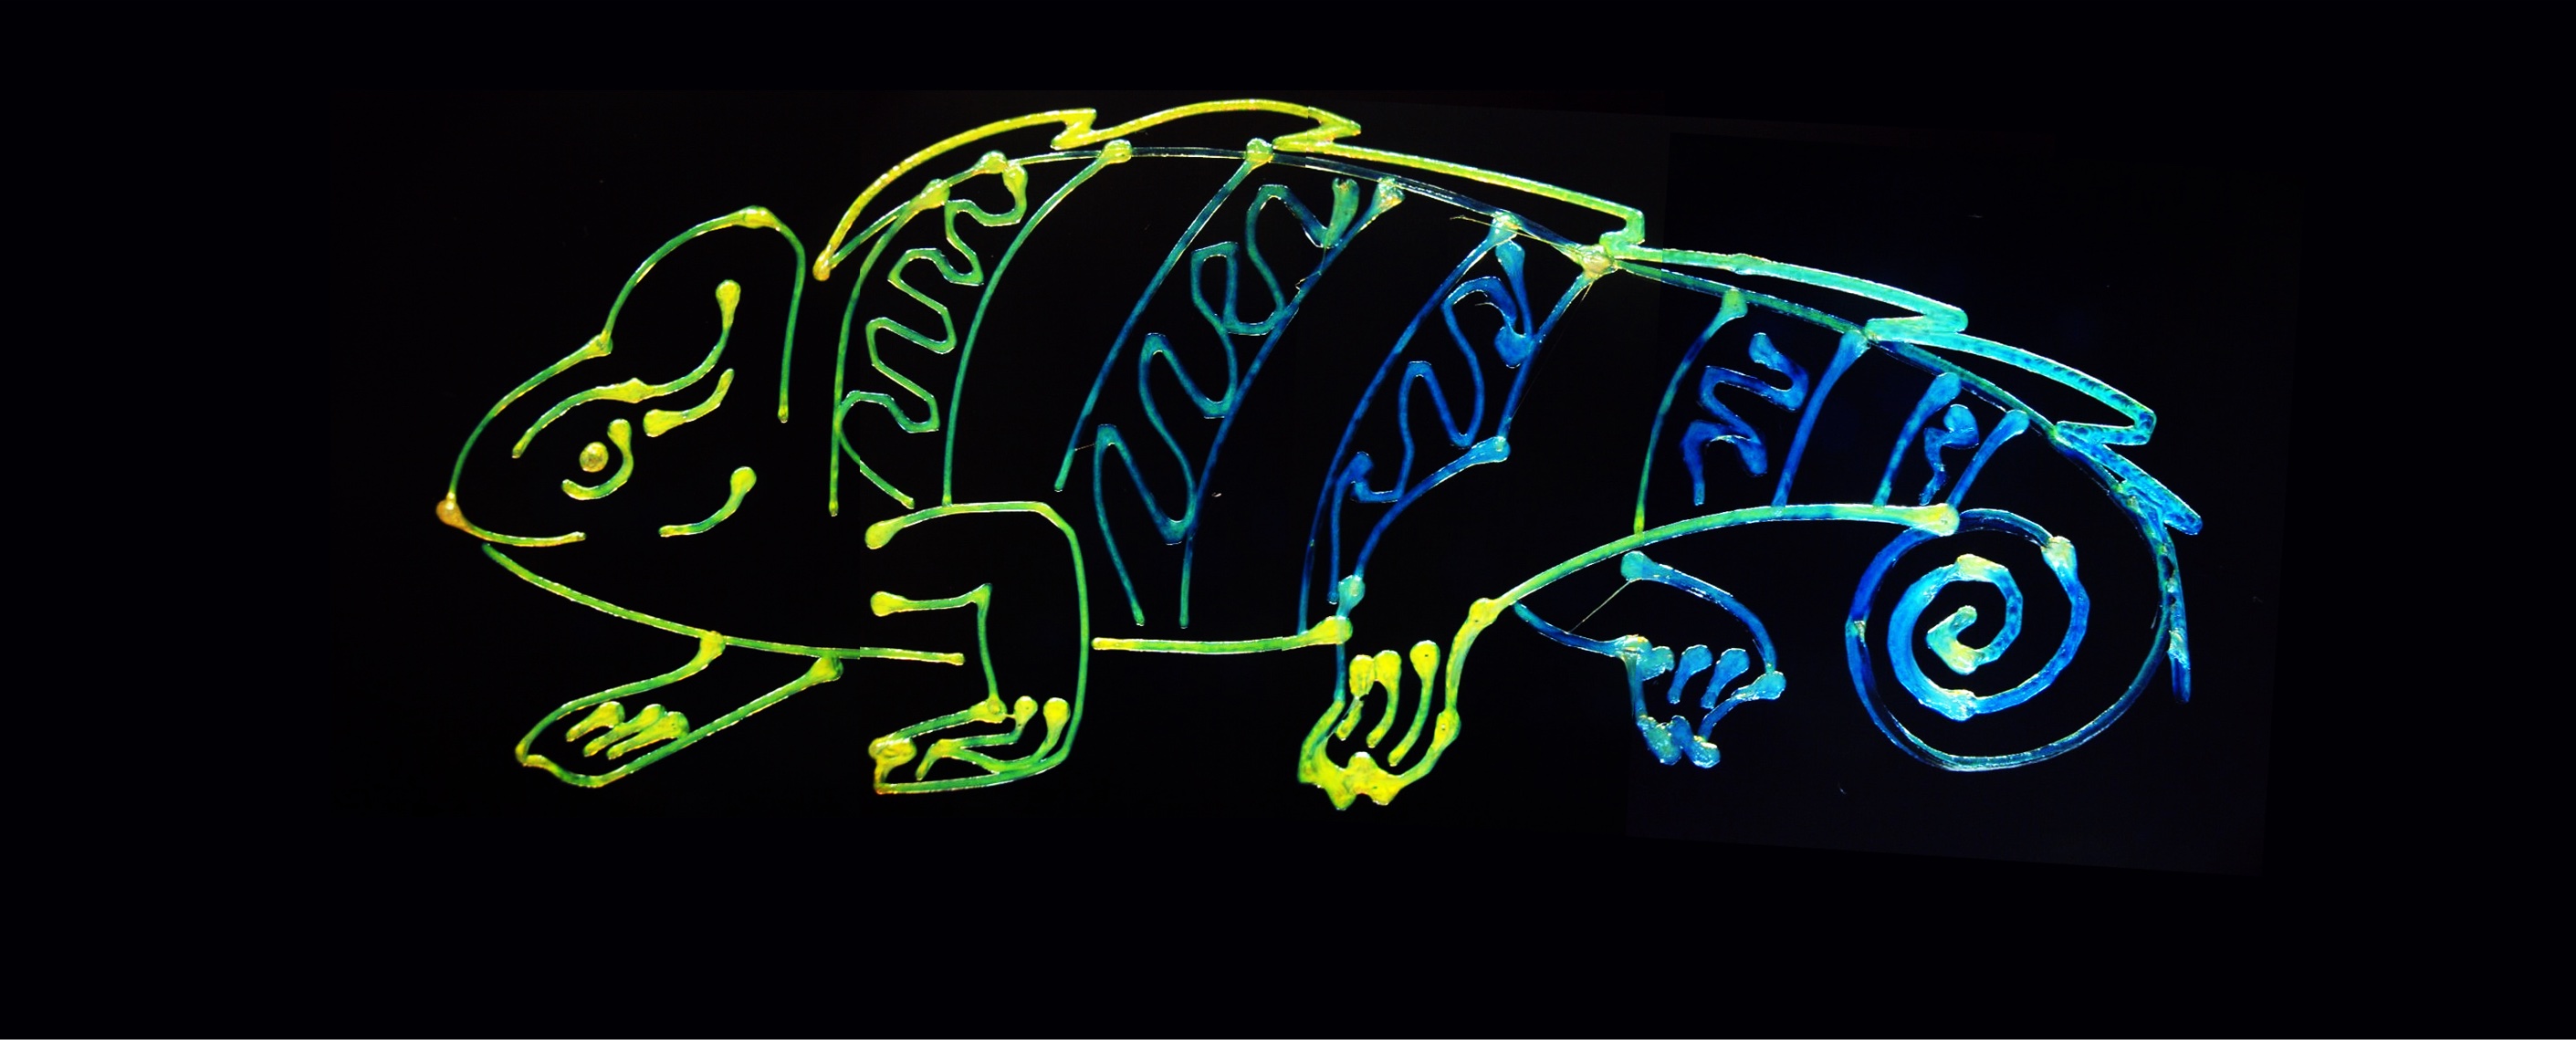 Inspired by the color-changing abilities of chameleons, researchers developed a dynamic and sustainable color-changing ink seen in this 3D printed chameleon illustration created by the research team. 